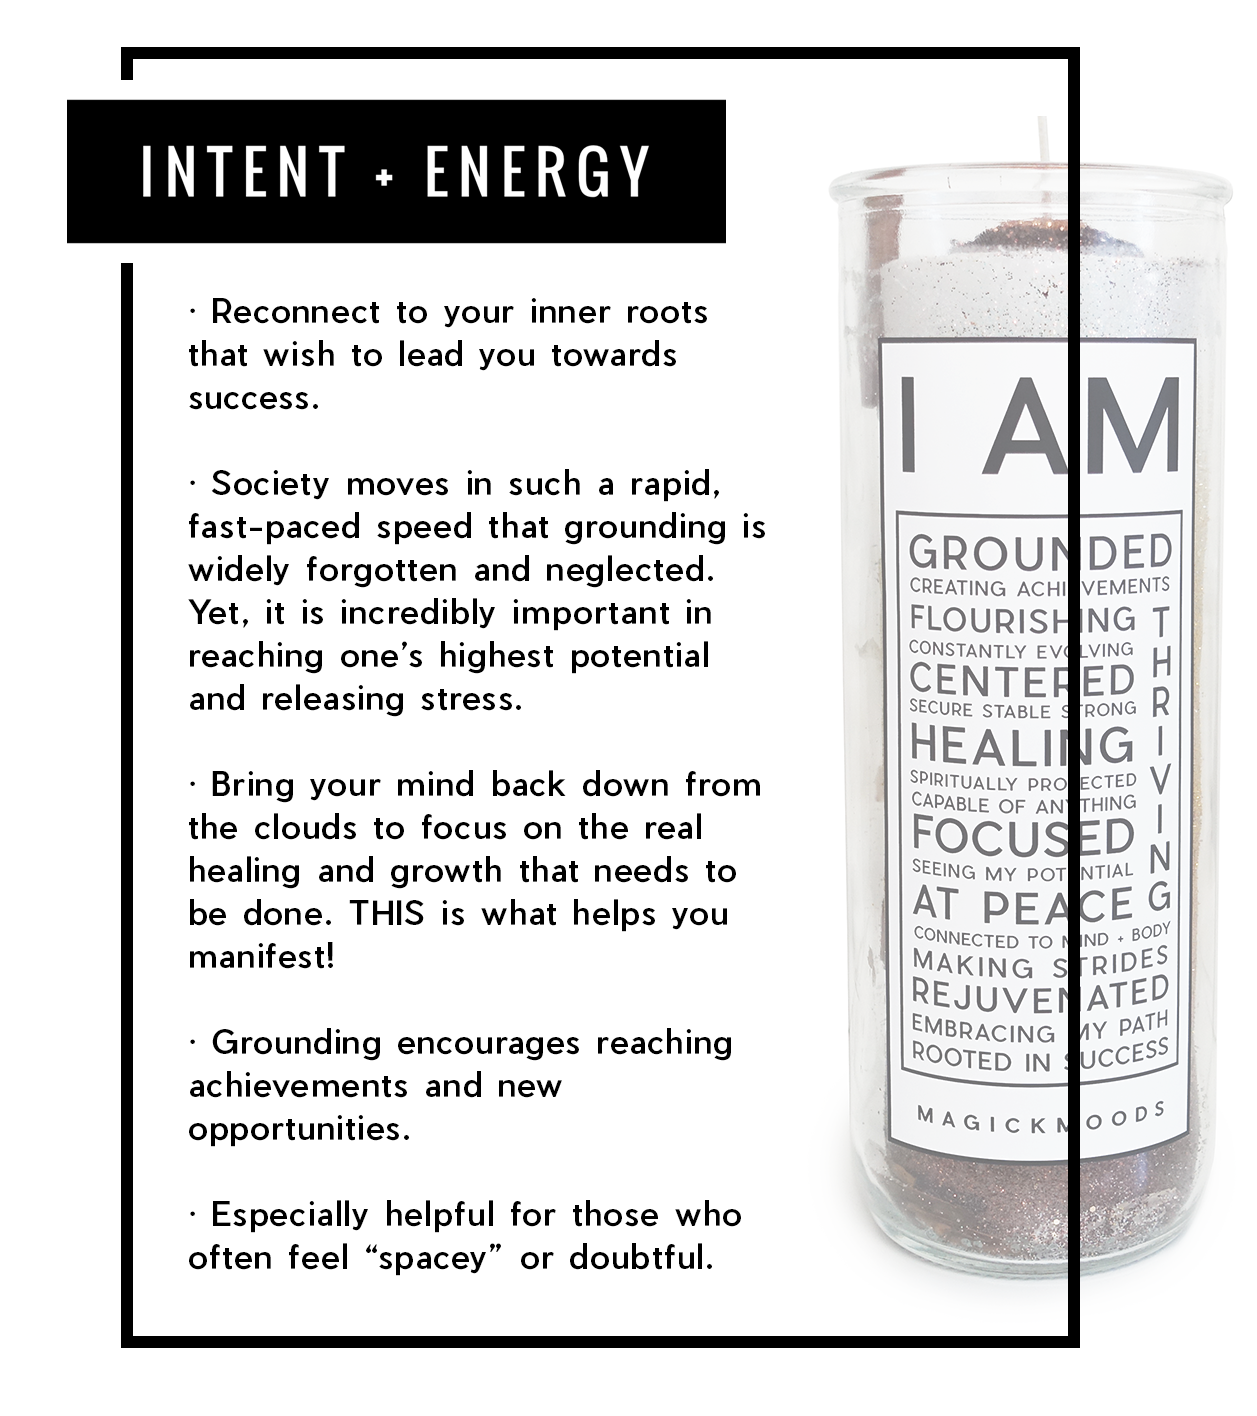 I Am Grounded 7-Day Meditation Candle - PREORDER - Ships by Feb 26th, 2024